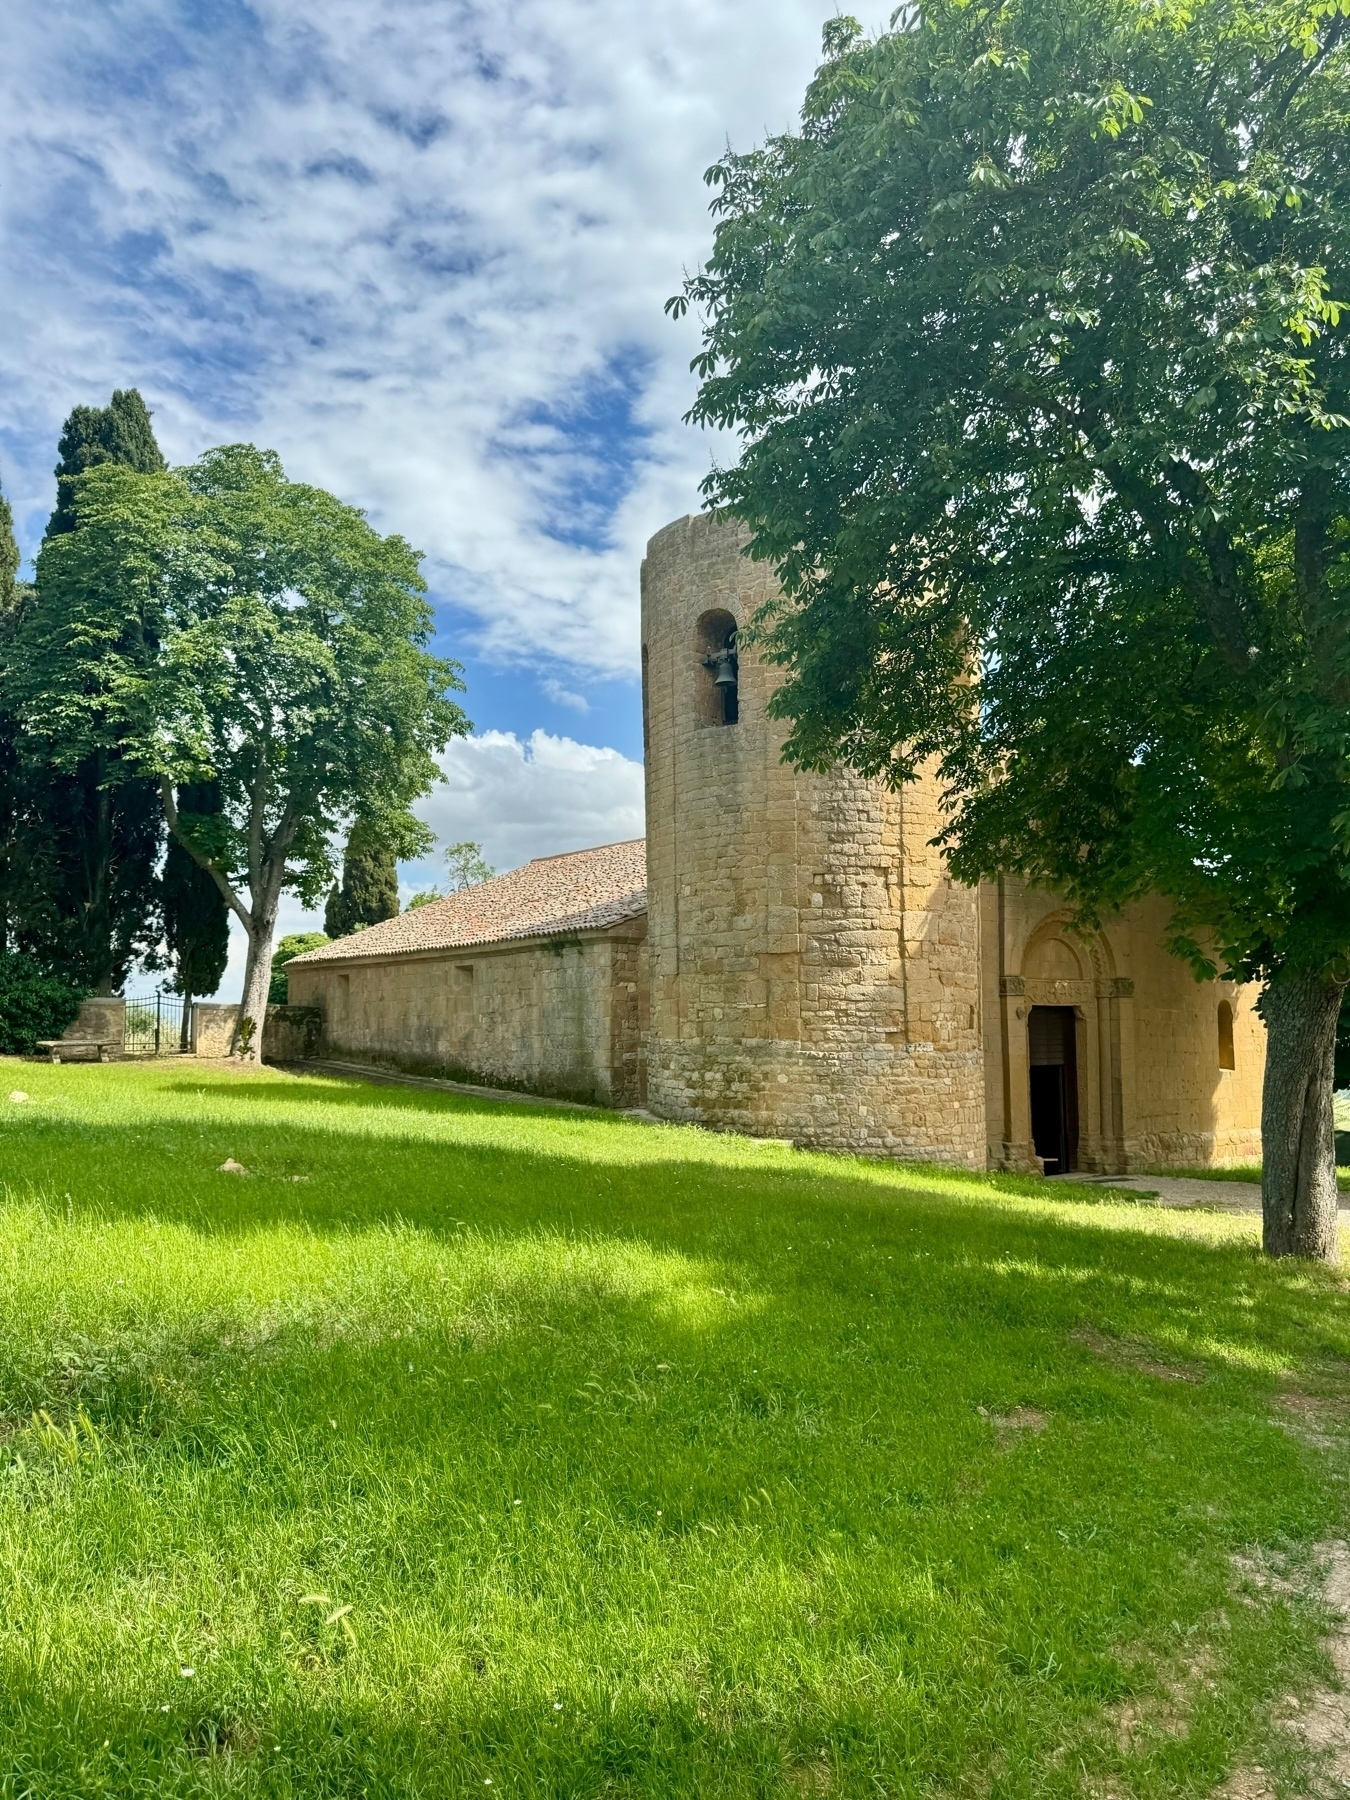 A historic stone church with a cylindrical tower and arched entrance, surrounded by lush green grass and leafy trees under a partly cloudy sky.